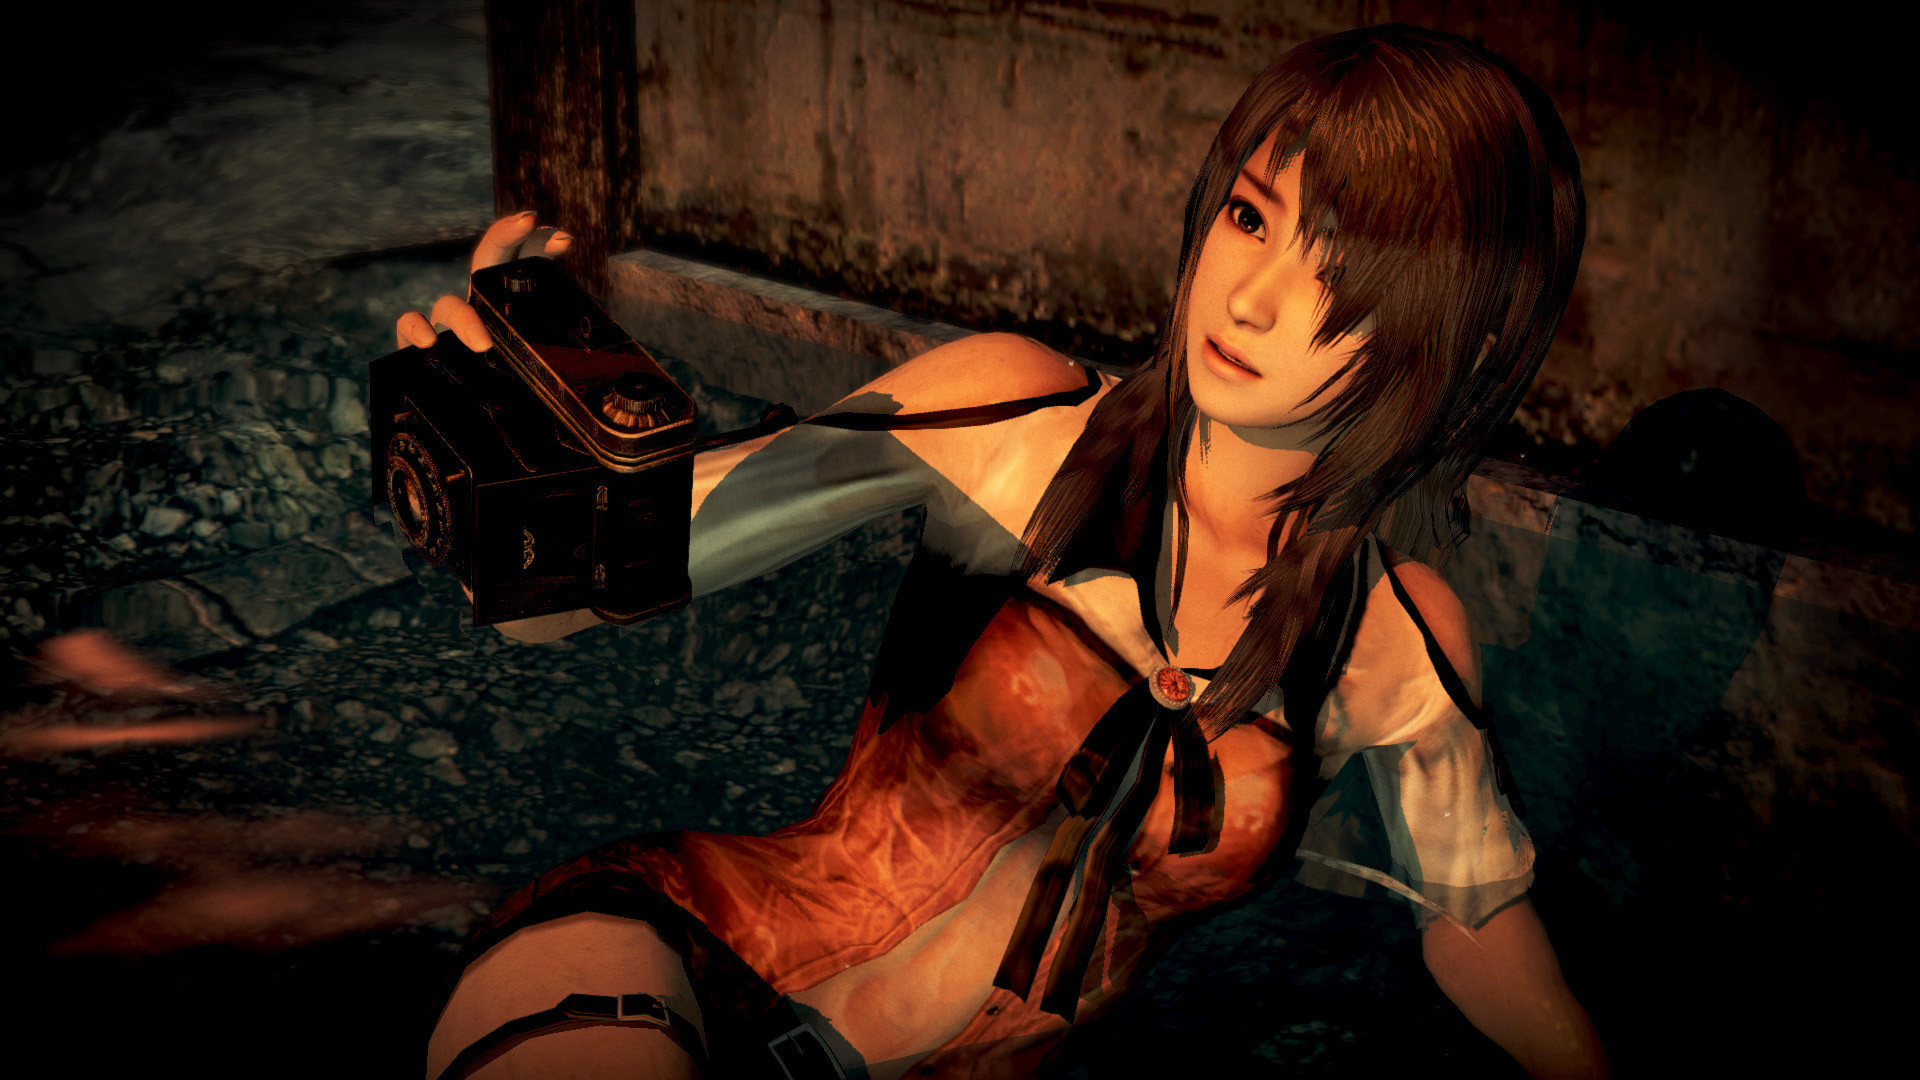 Download FATAL FRAME PROJECT ZERO Maiden of Black Water para pc via torrent